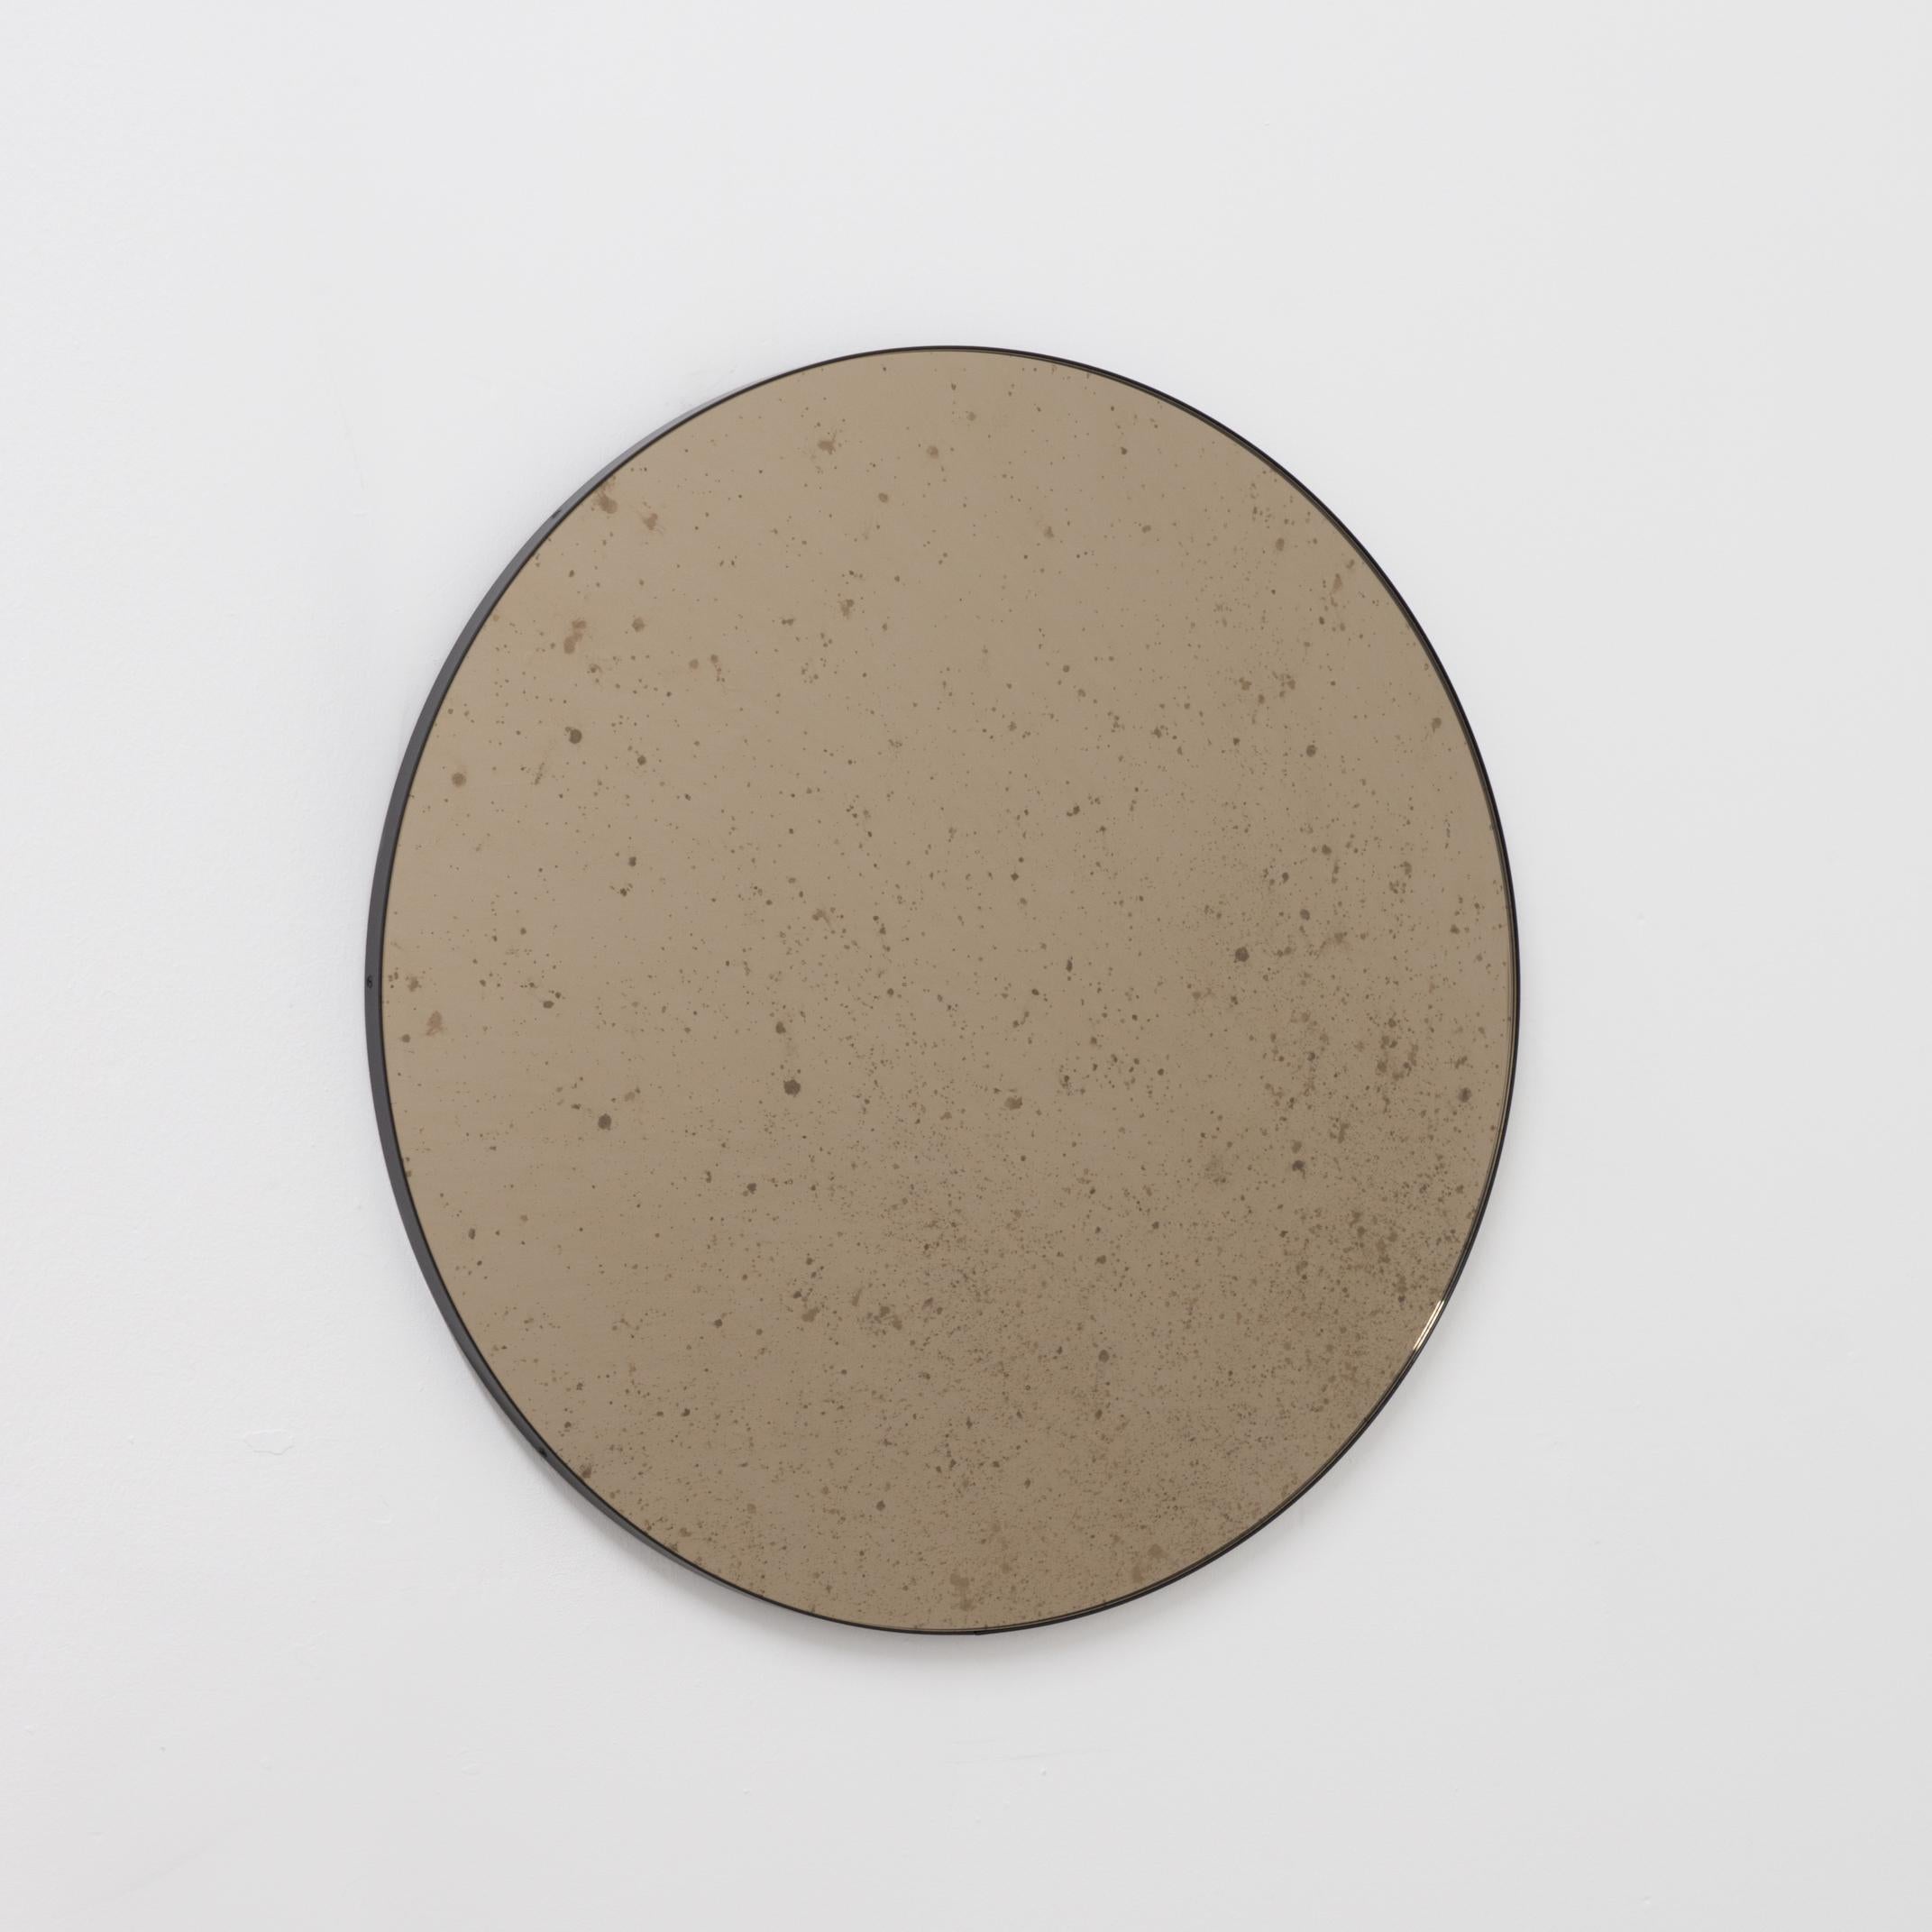 Delightful antiqued Orbis™ round bronze tinted mirror with a minimalist black aluminium powder coated frame. Designed and handcrafted in London, UK.

Our mirrors are designed with an integrated French cleat (split batten) system that ensures the